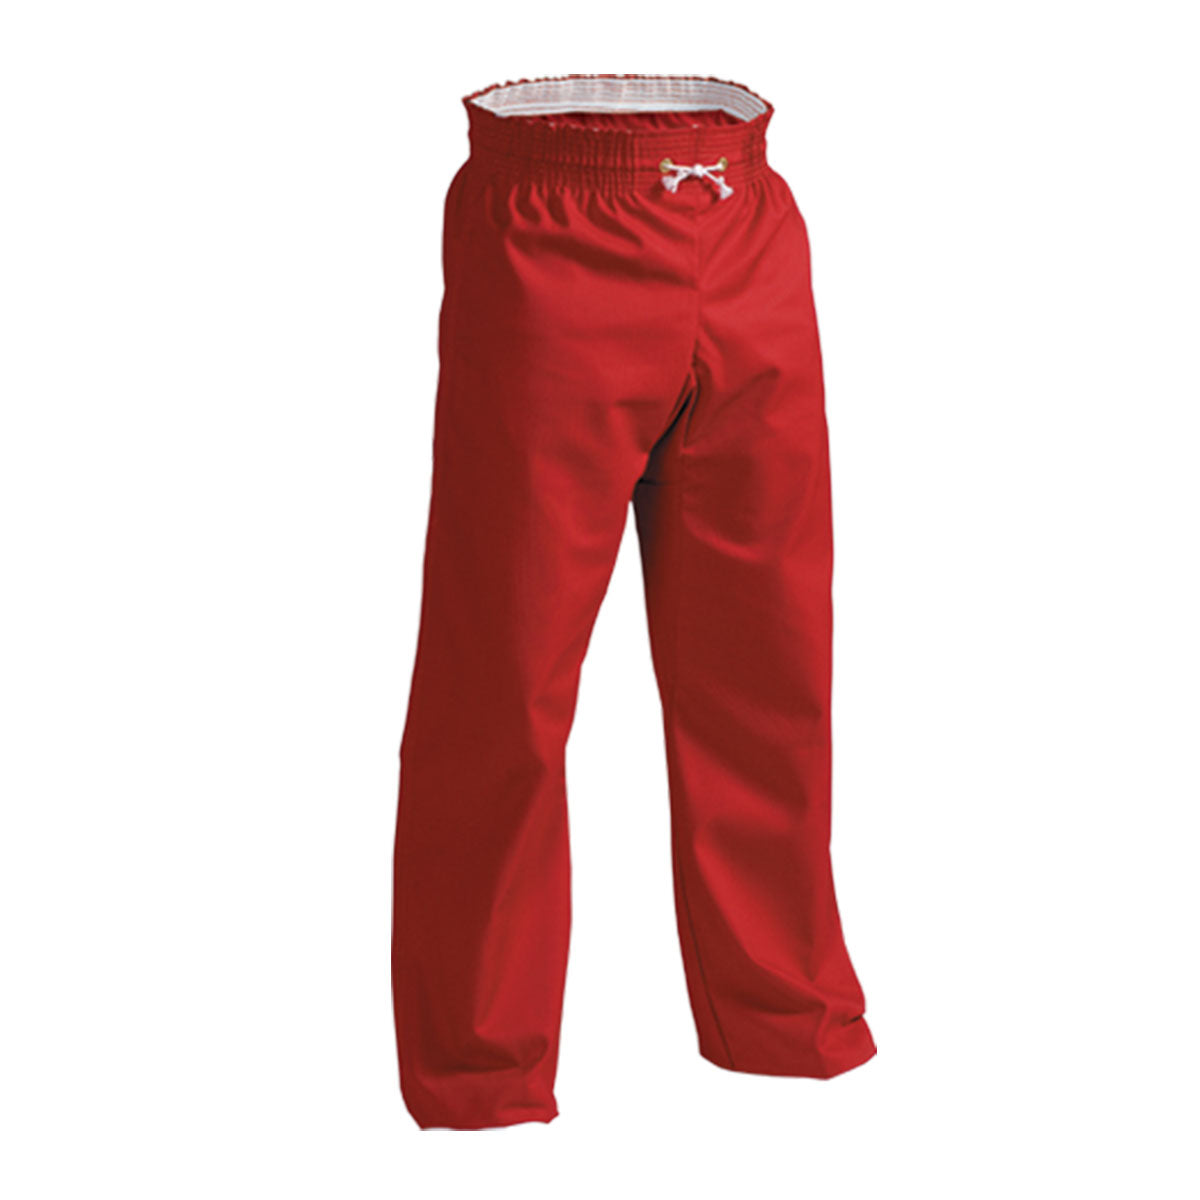 8 oz. Middleweight Contact Pants